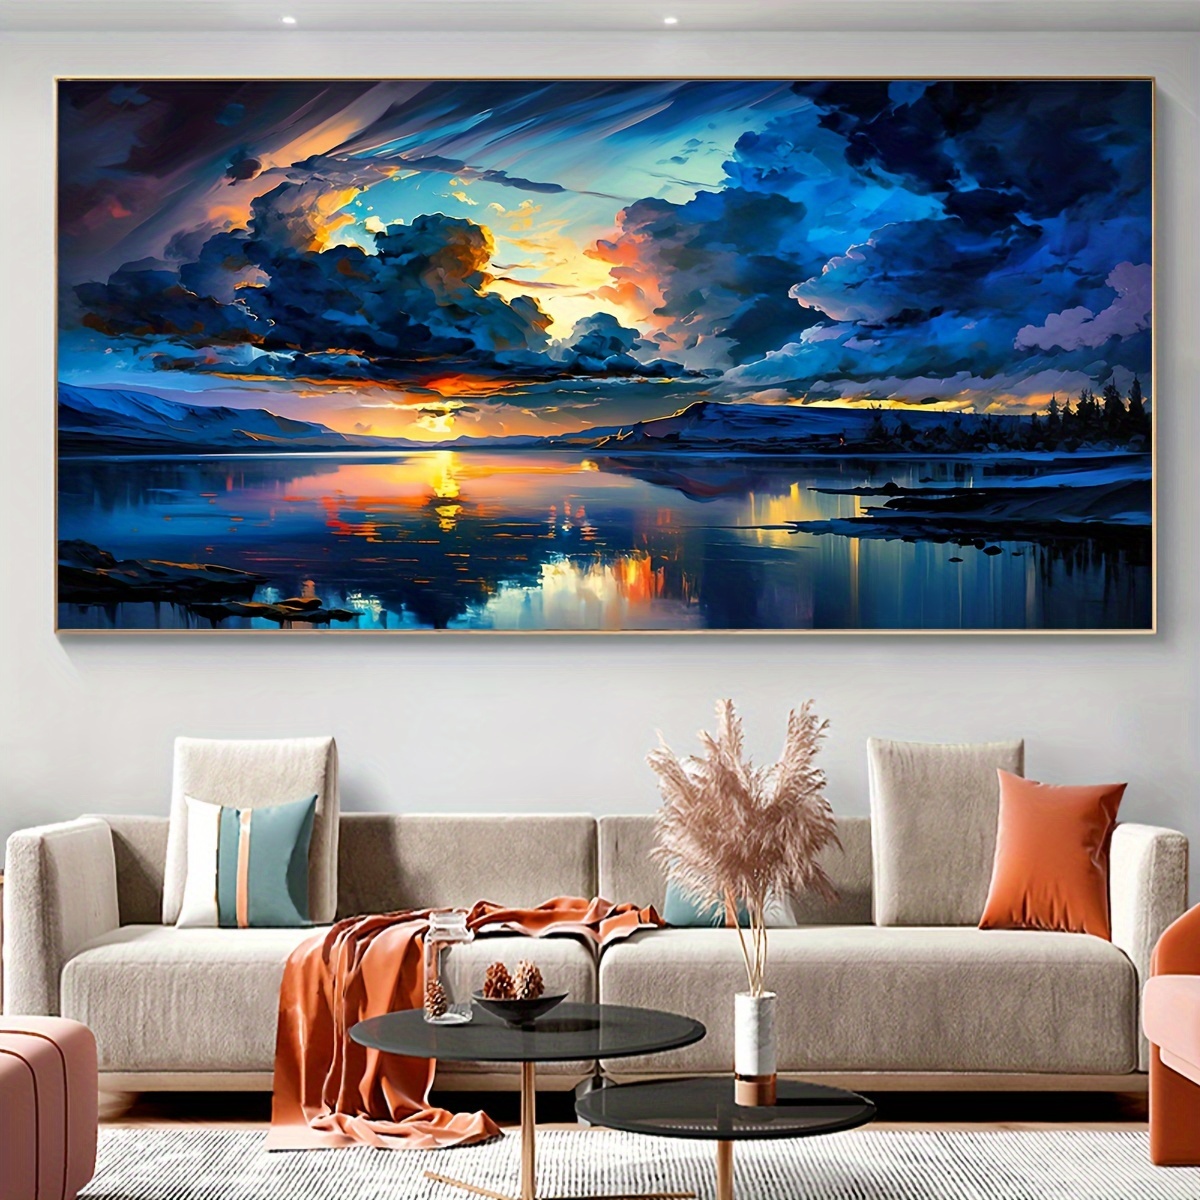 

1pc Unframed Canvas Poster, Modern Art, Beautiful Scenery, Ideal Gift For Bedroom Living Room Corridor, Wall Art, Wall Decor, Winter Decor, Room Decoration